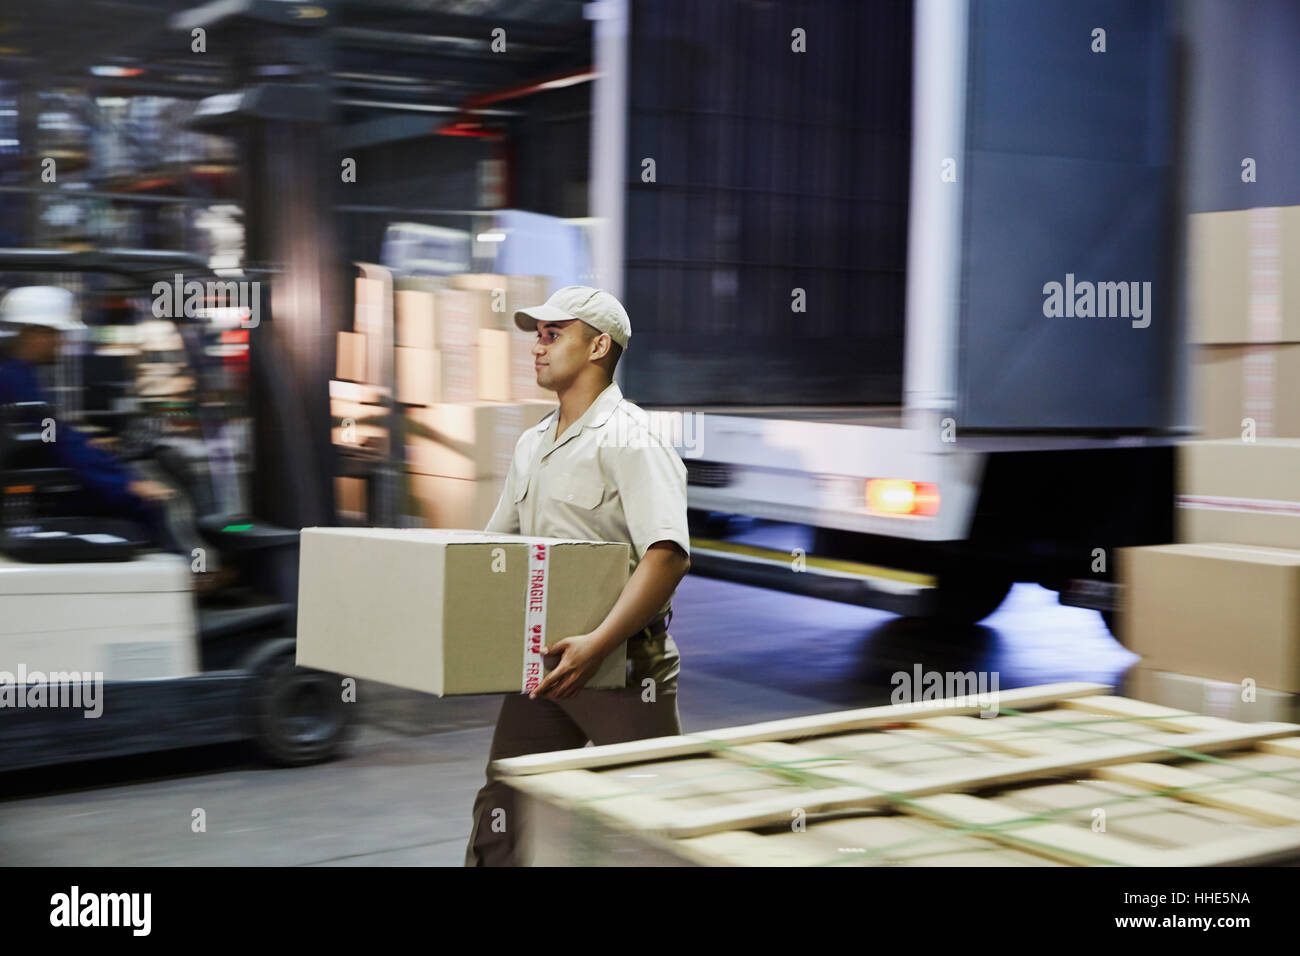 Worker carrying cardboard box at distribution warehouse loading dock Stock Photo